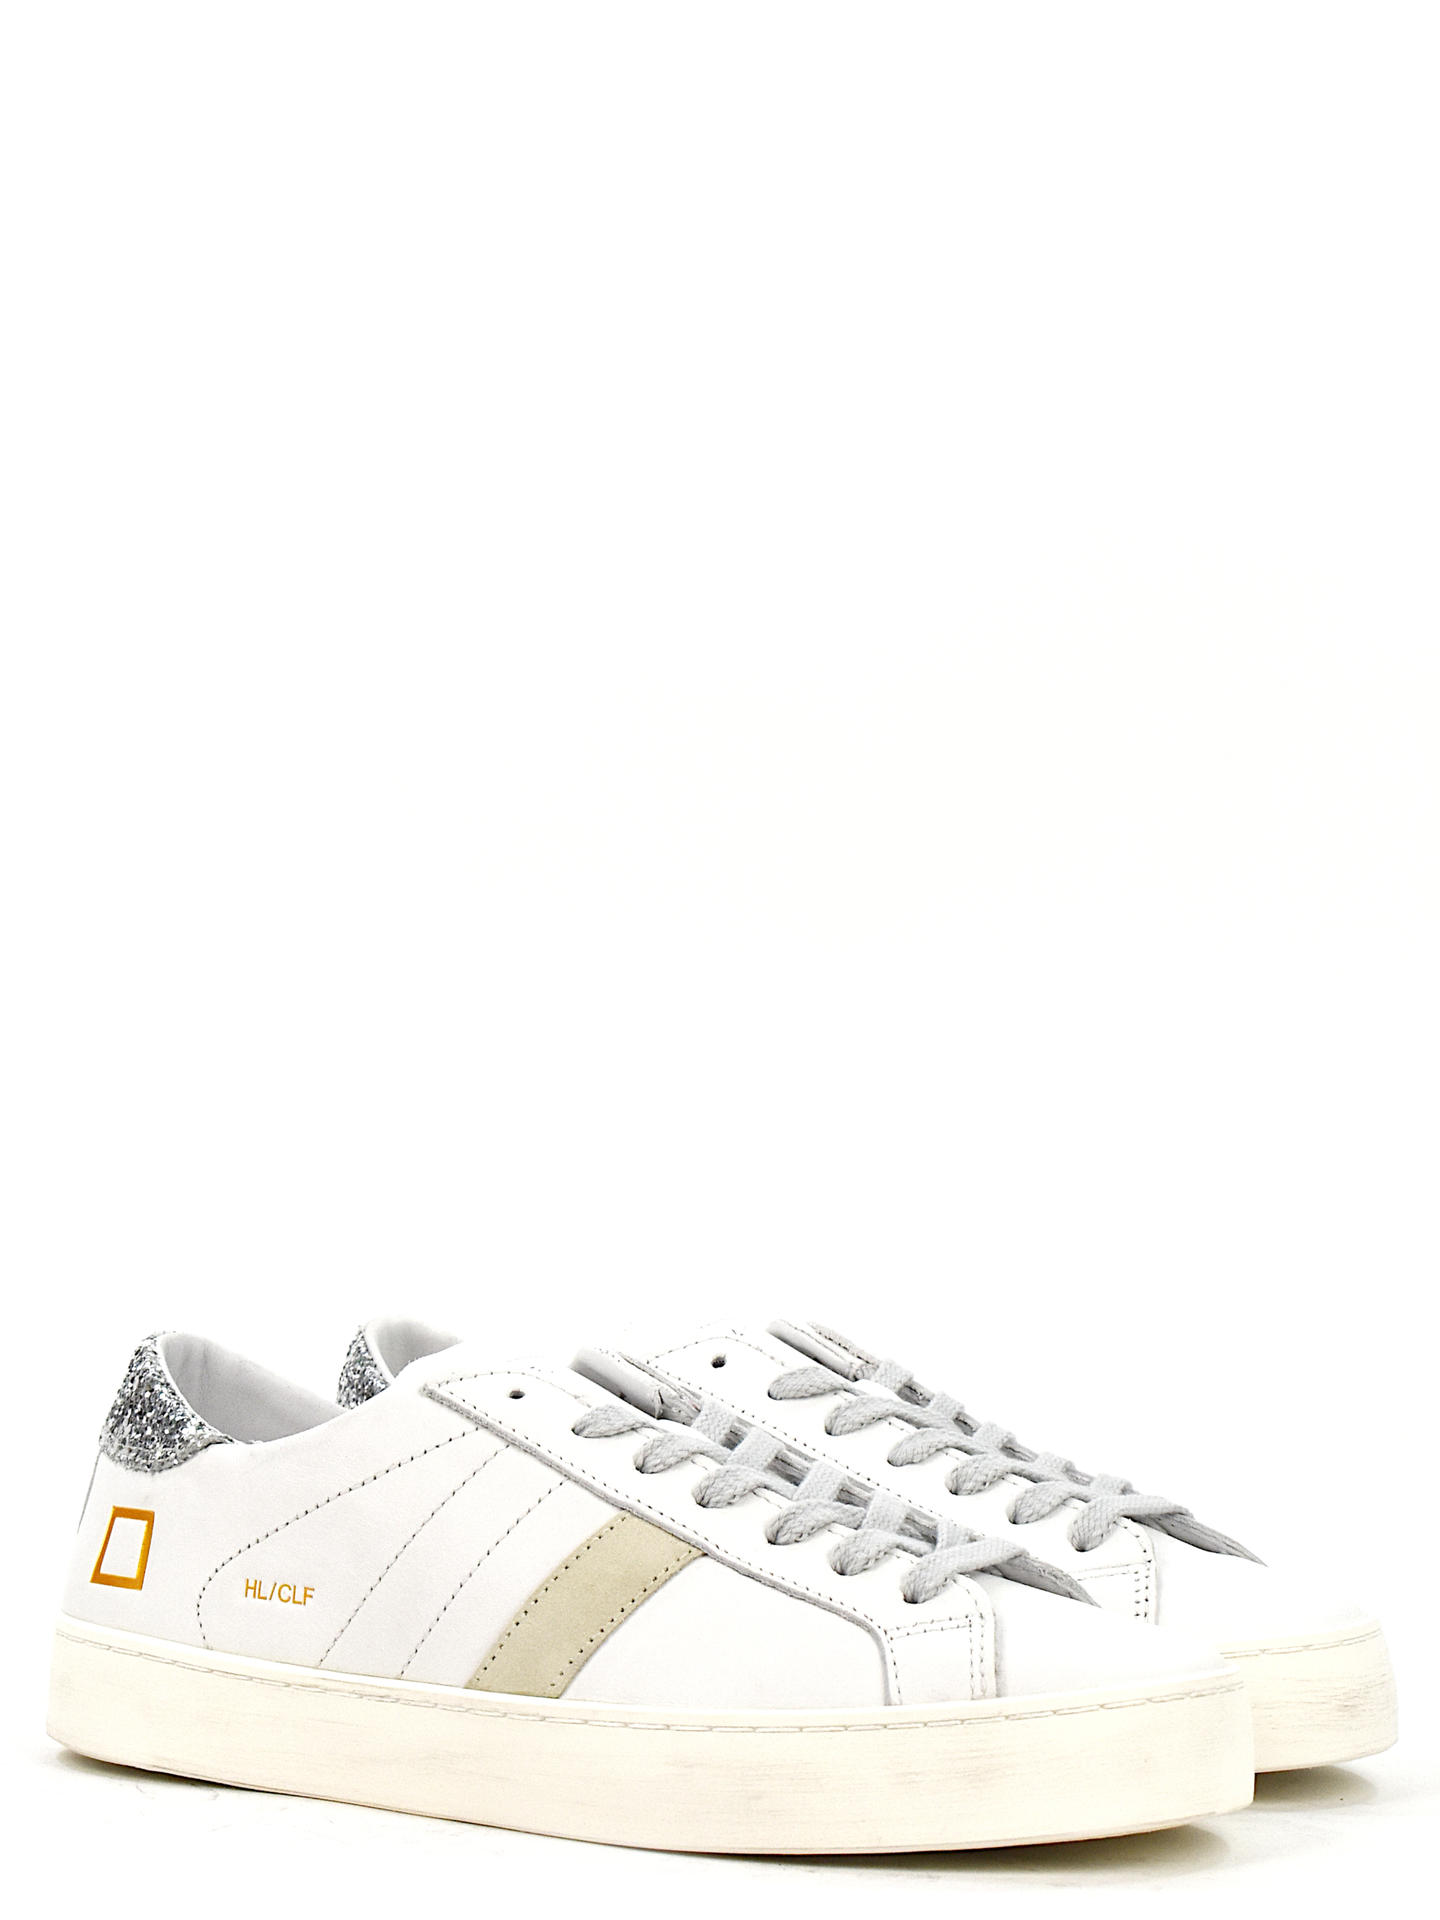 SNEAKERS D.A.T.E HLCAWS BIANCO/ARGENTO